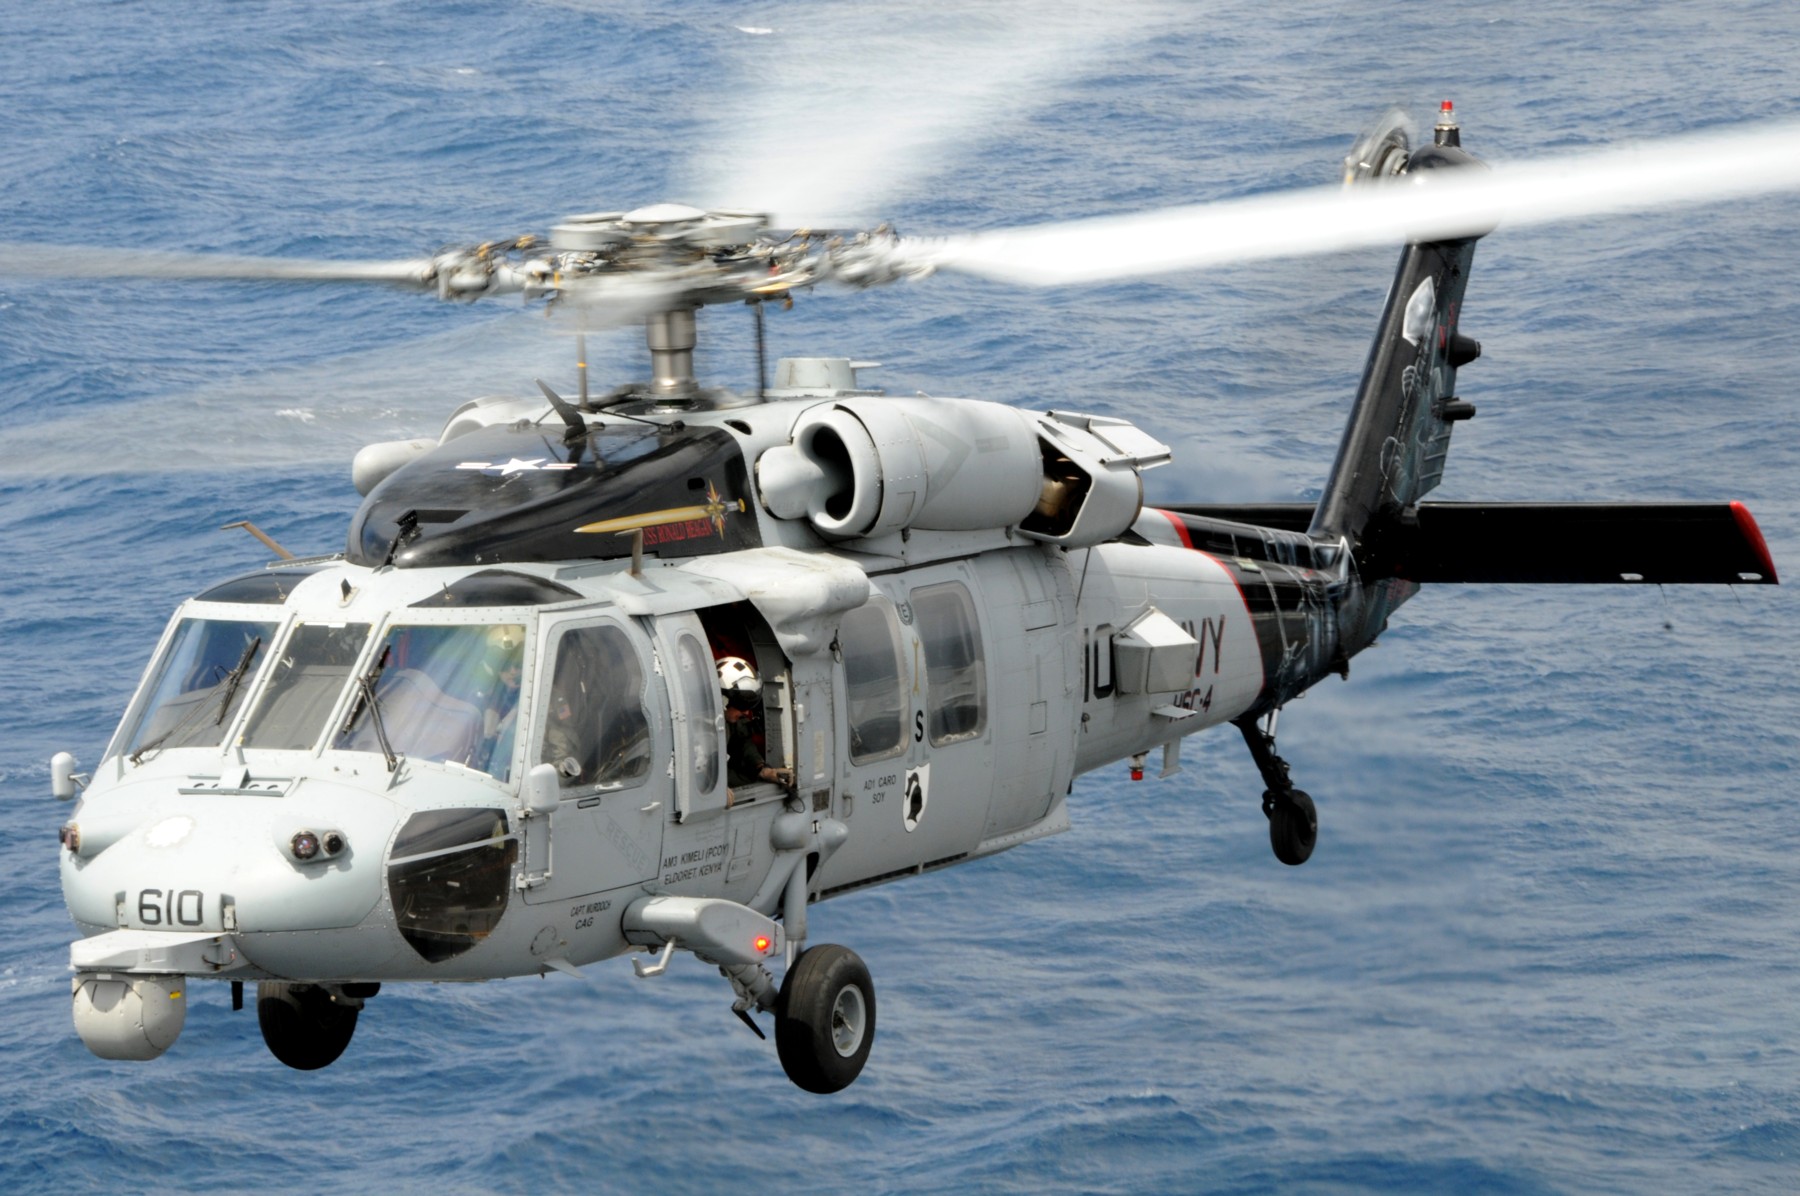 hsc-4 black knights helicopter sea combat squadron us navy mh-60s seahawk 2013 11